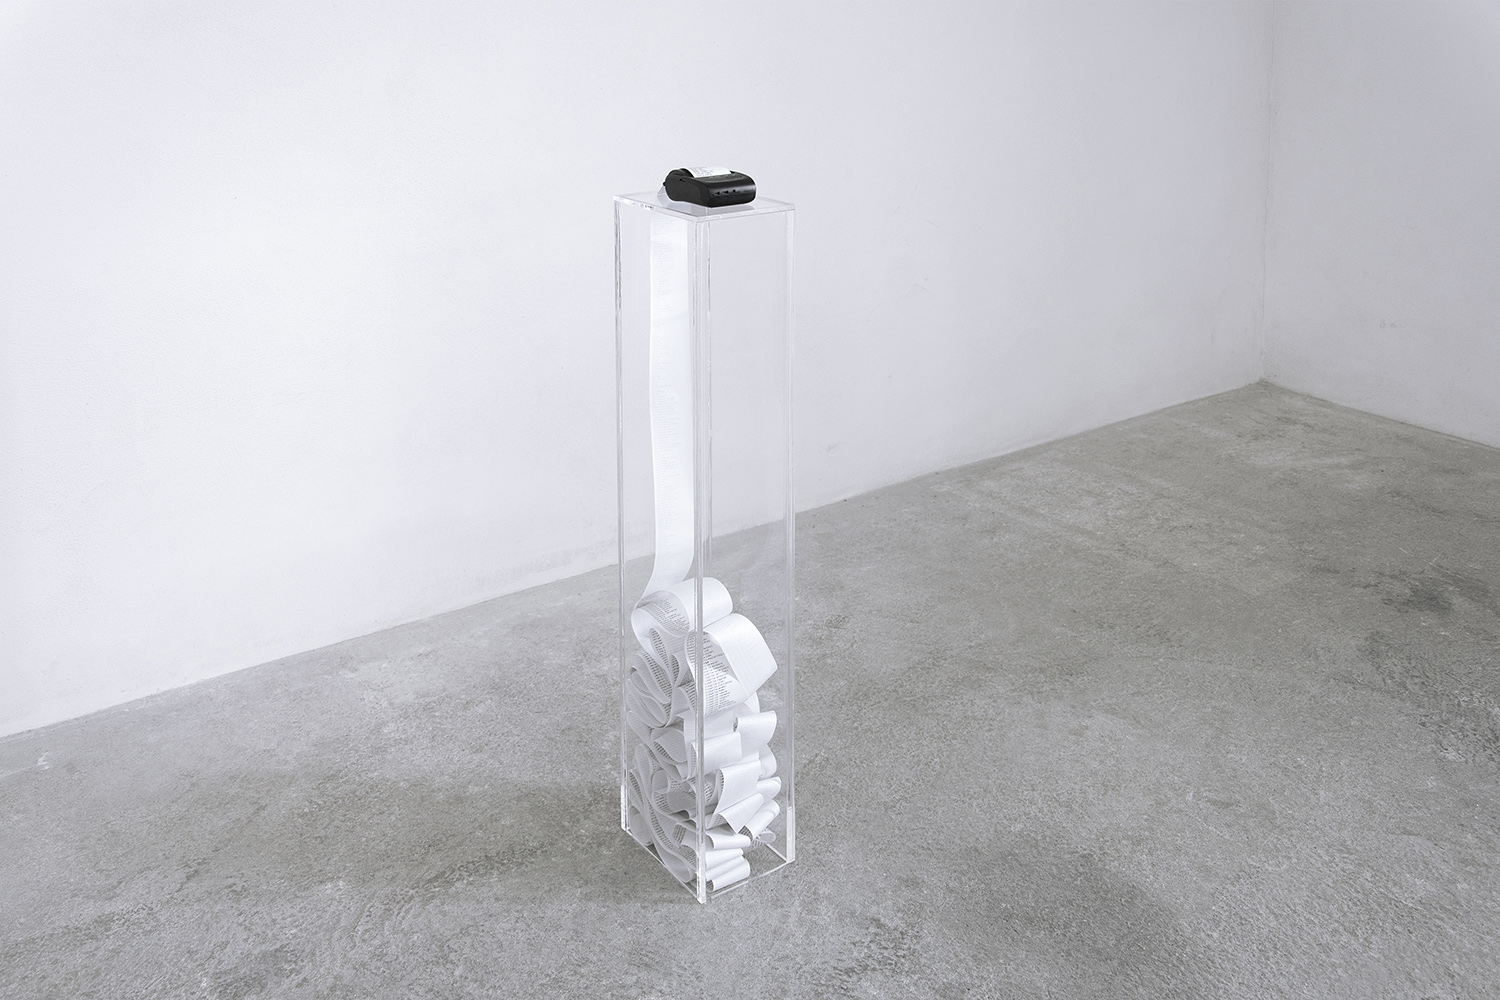 an art installation with thermal printer, thermal paper and plexiglas